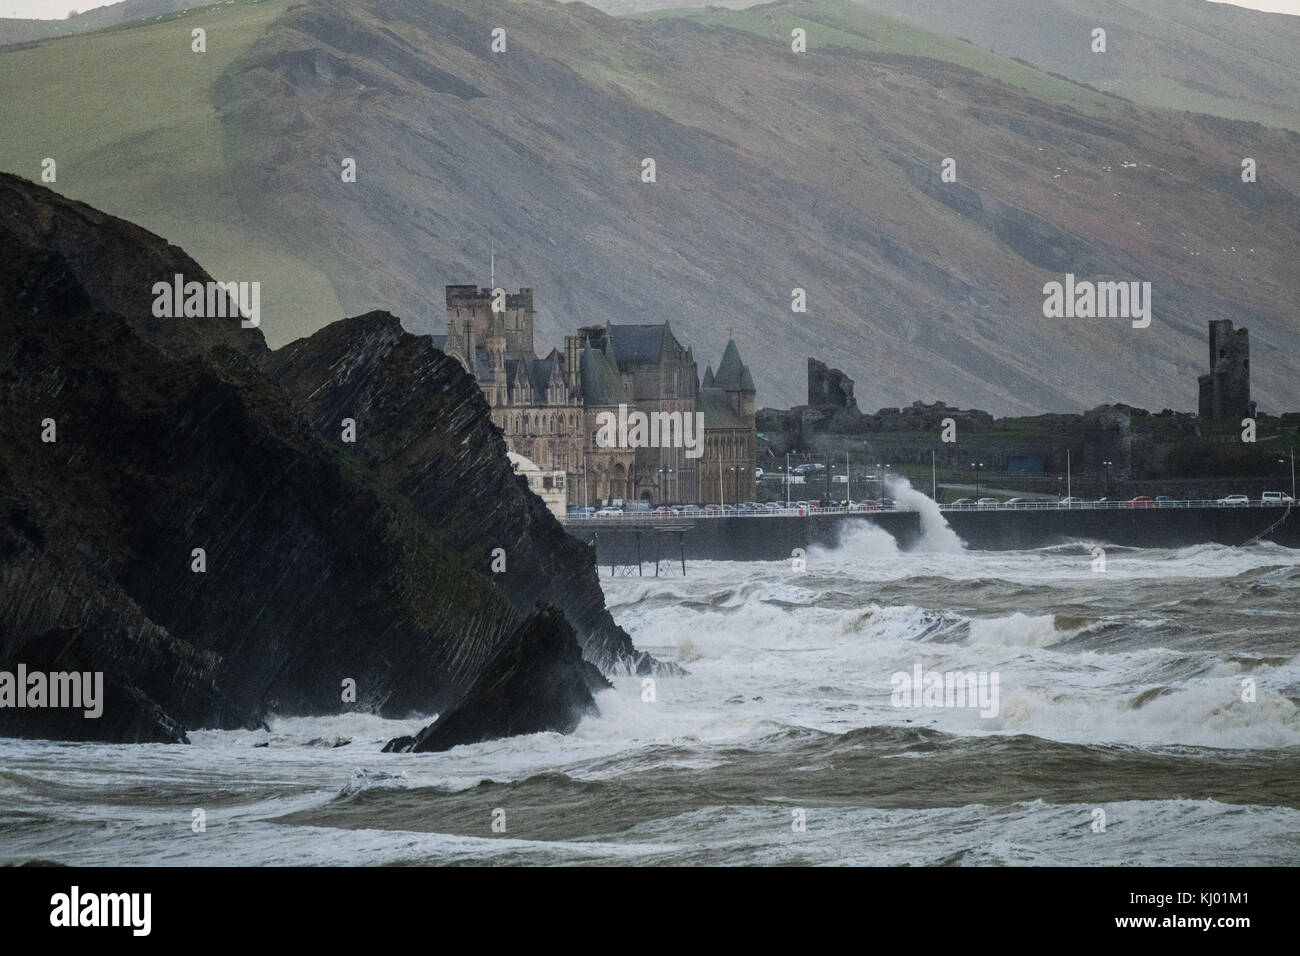 Aberystwyth Wales UK, Thursday 23 November 2017 UK Weather: High tides and very strong winds combine to bring waves crashing into the castle headland and university buildings on the promenade in Aberystwyth, on the Cardigan Bay coast of west wales. photo Credit: Keith Morris/Alamy Live News Stock Photo